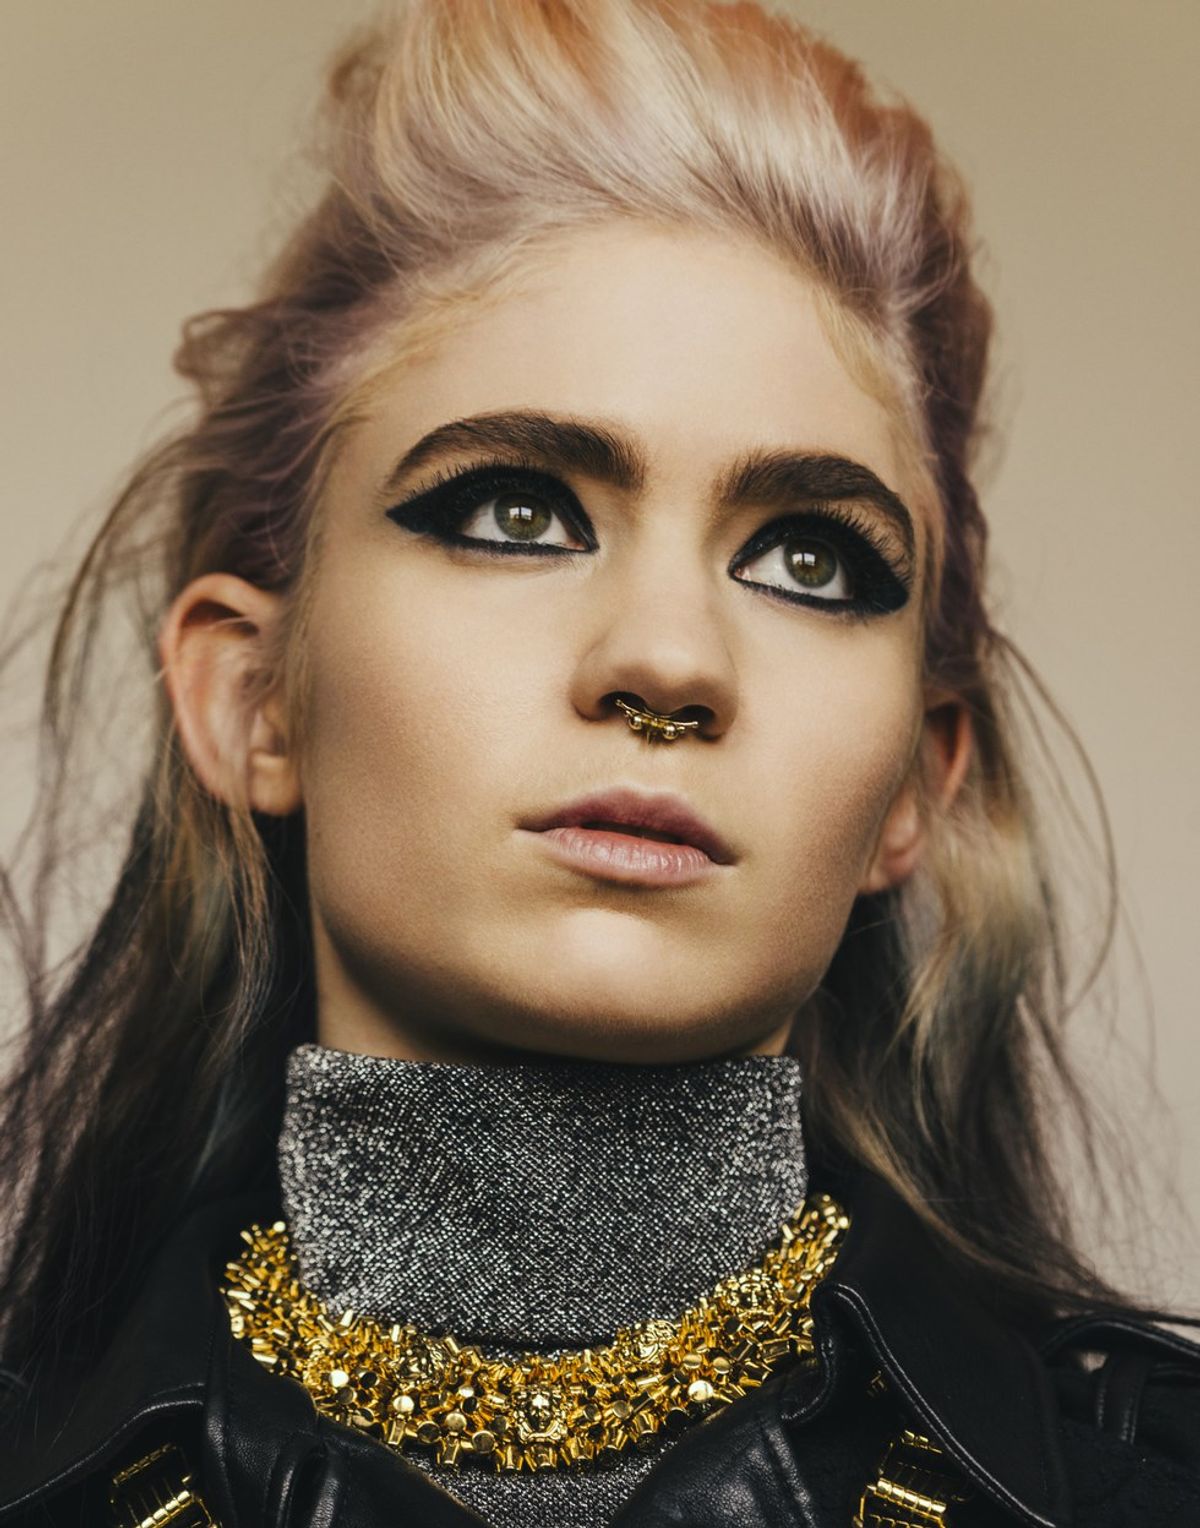 Why You Should Know Grimes